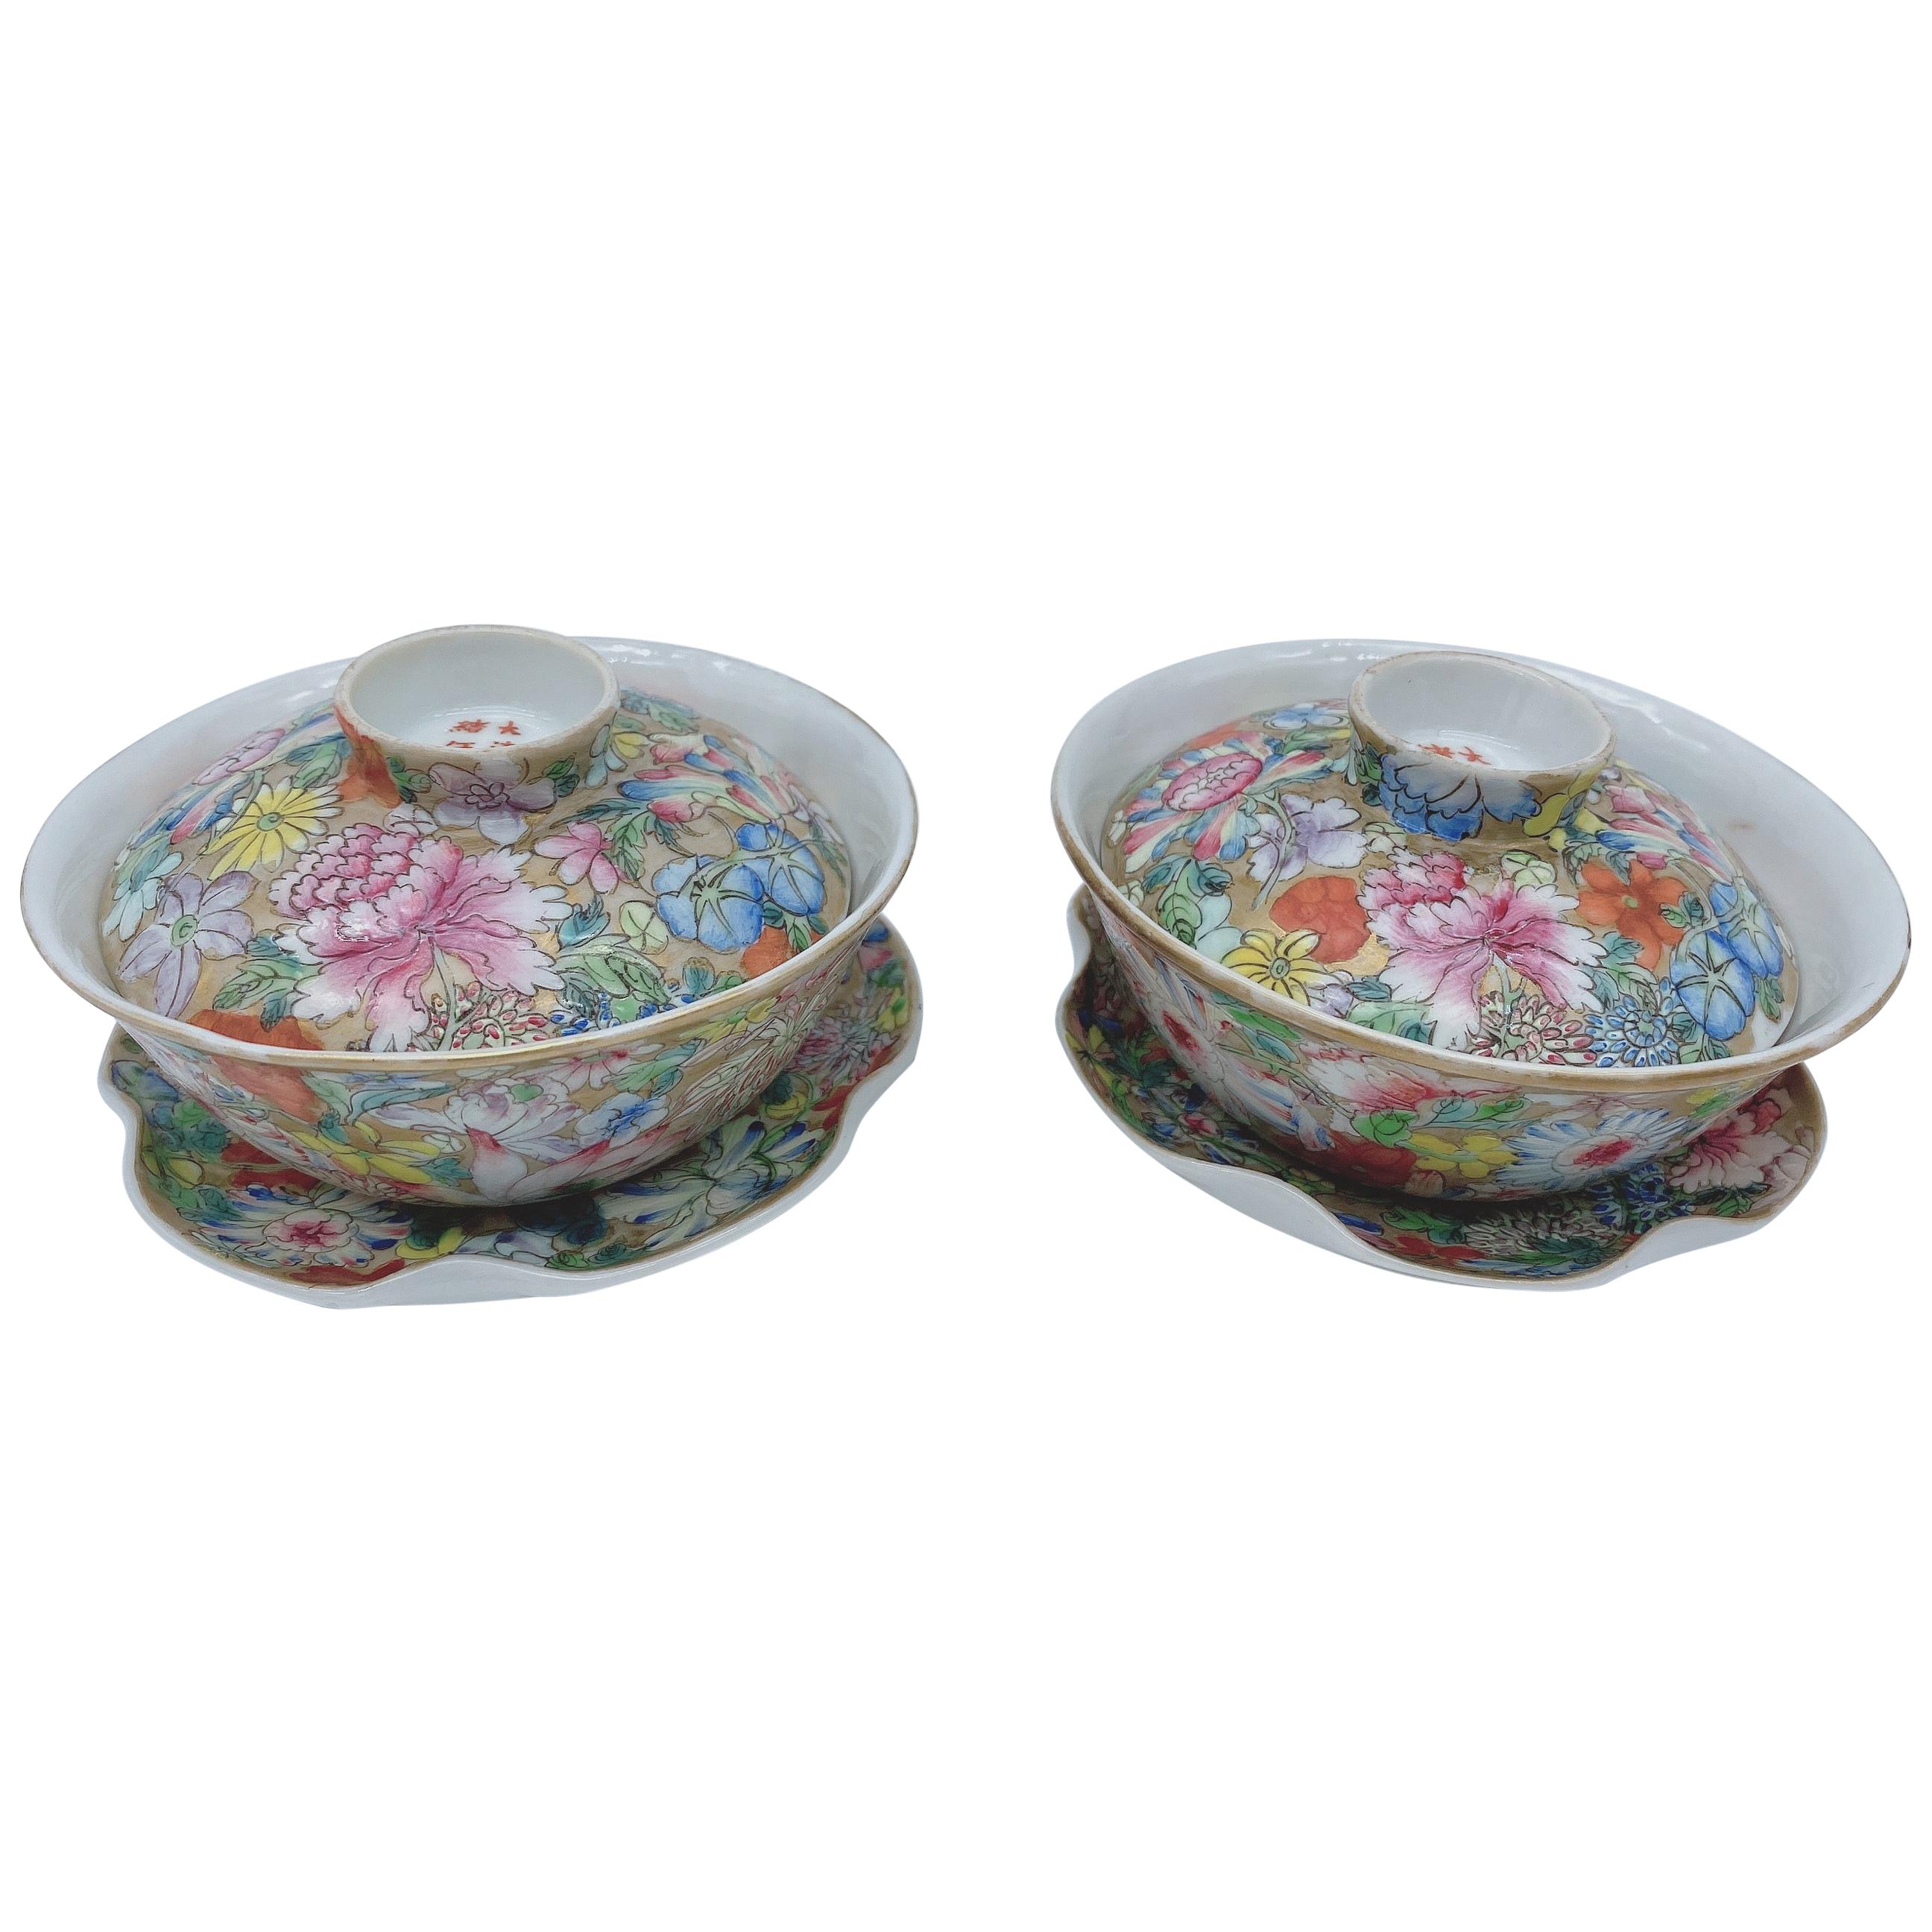 Pair of 19th Century Chinese Flower-Blossom Porcelain Cups with Cover and Base For Sale